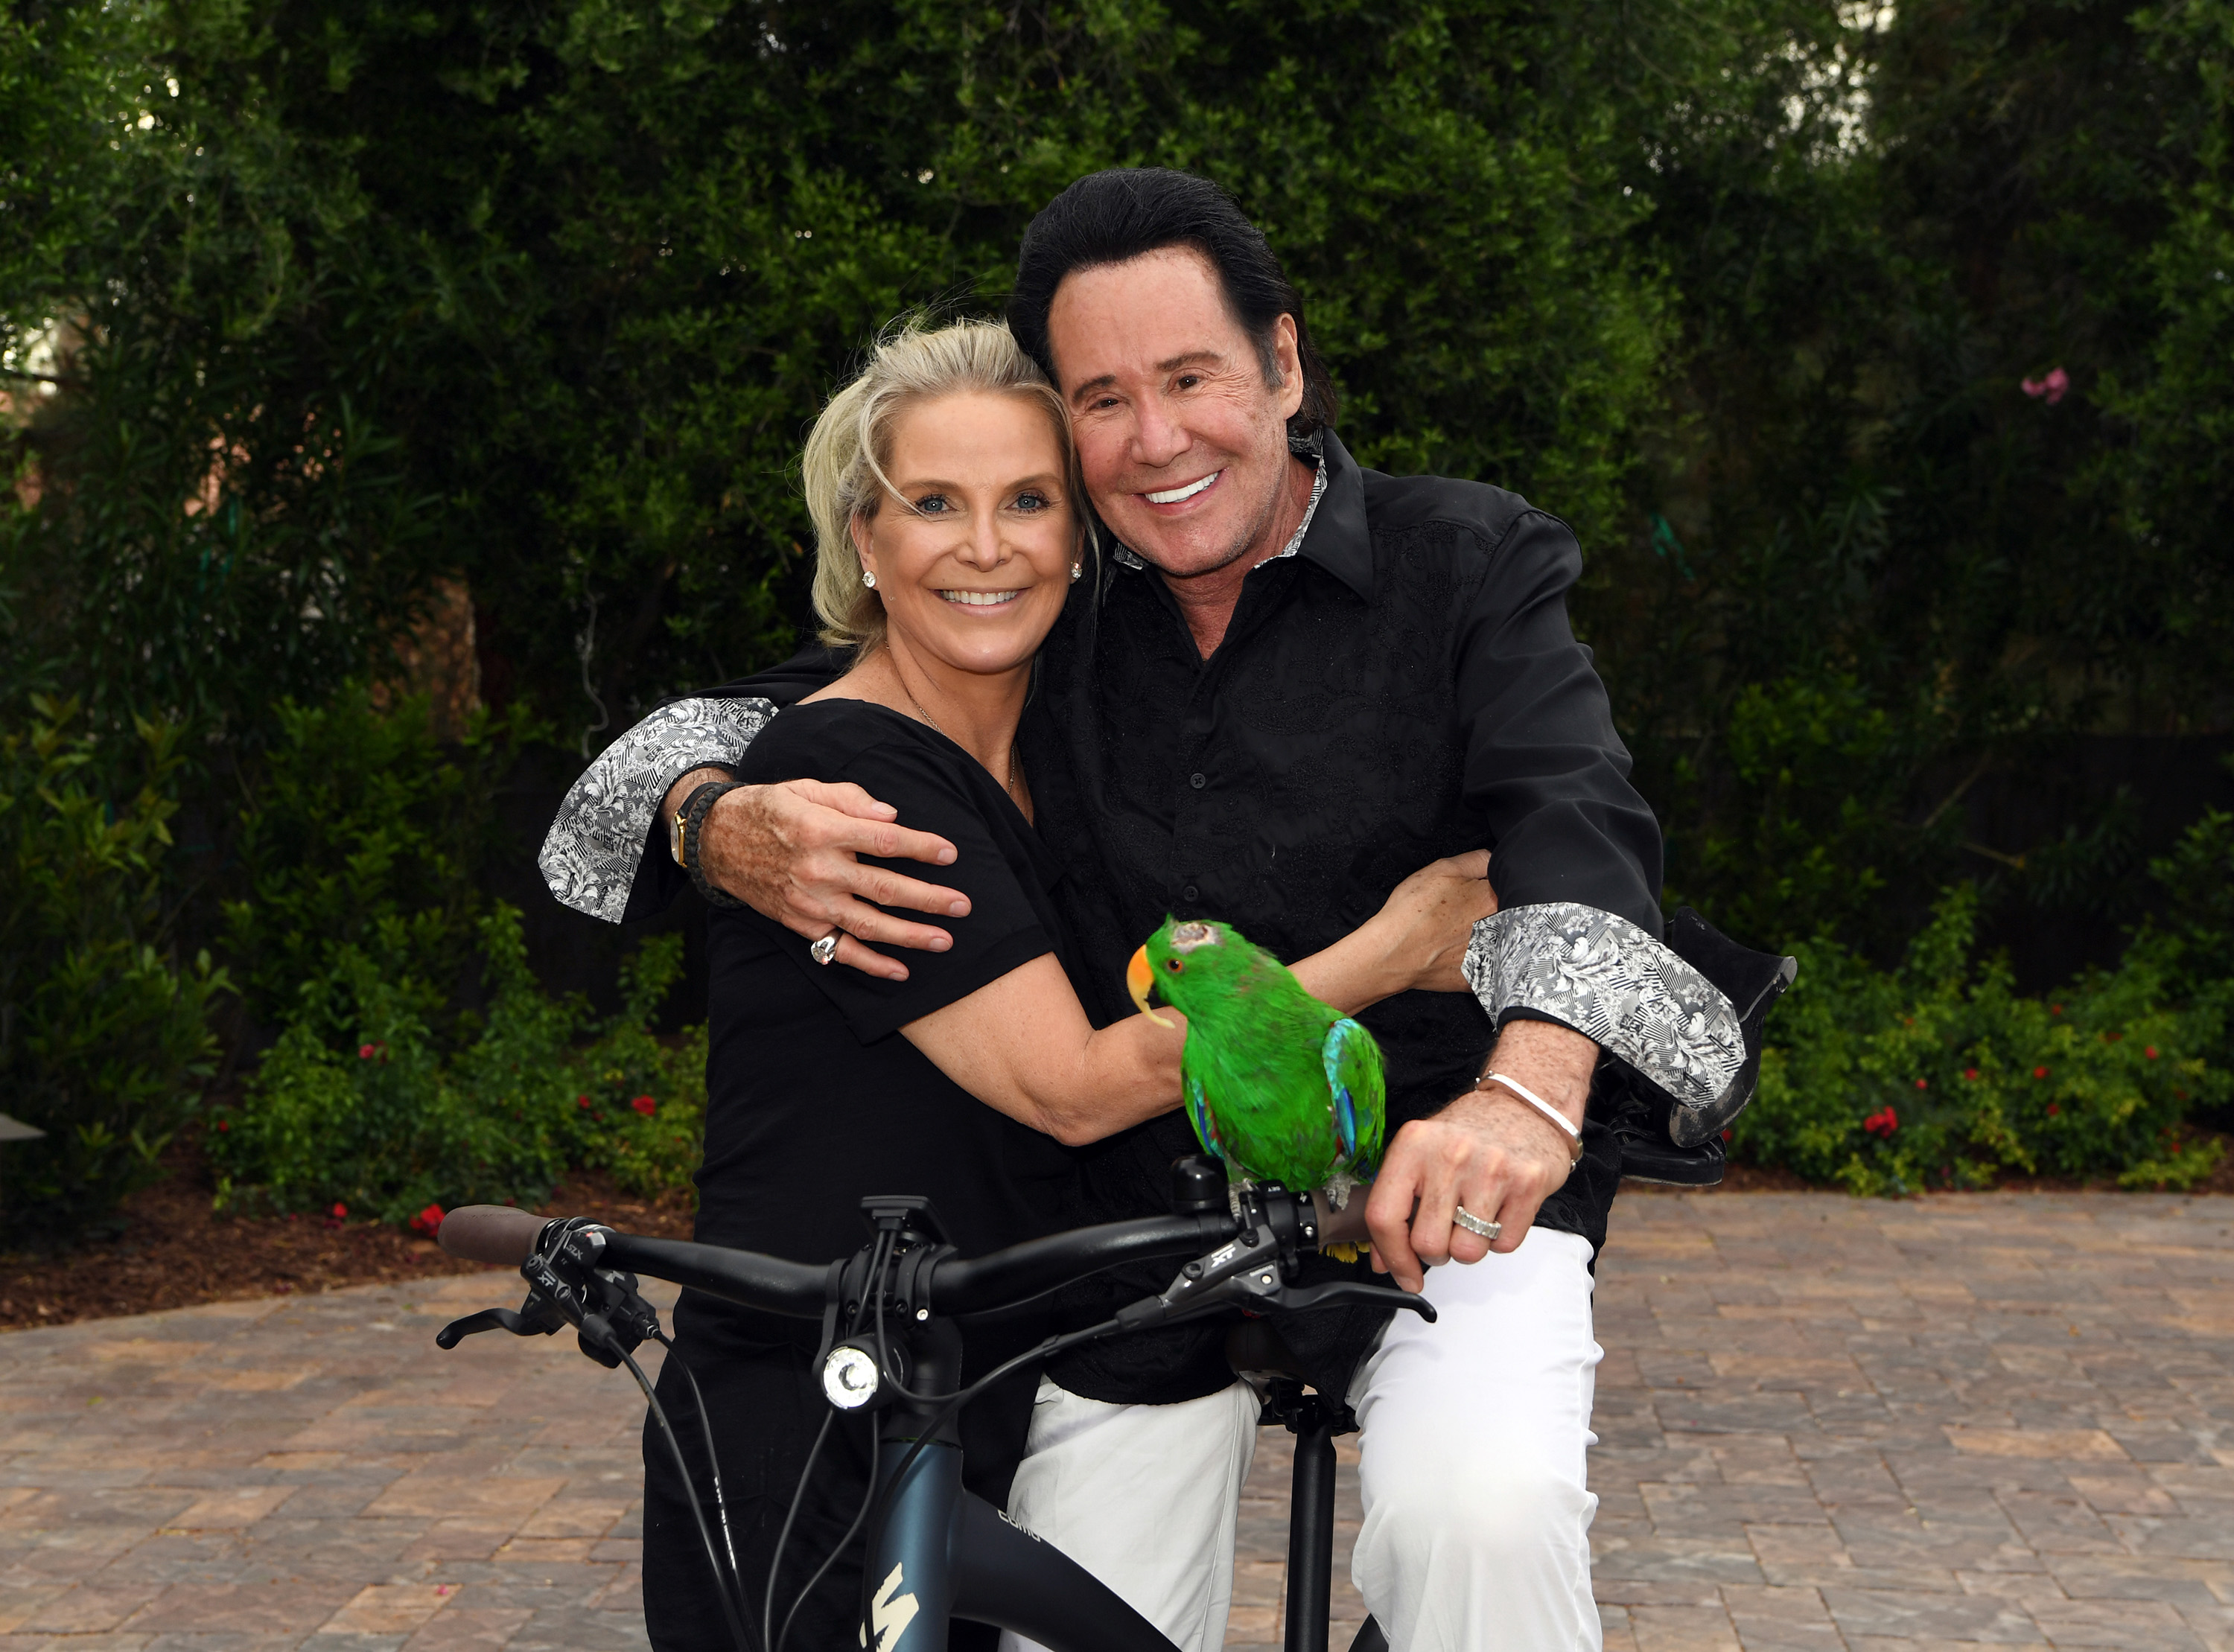 Kathleen Newton and Wayne Newton pose for a photo at their home on May 22, 2020, in Las Vegas, Nevada | Source: Getty Images